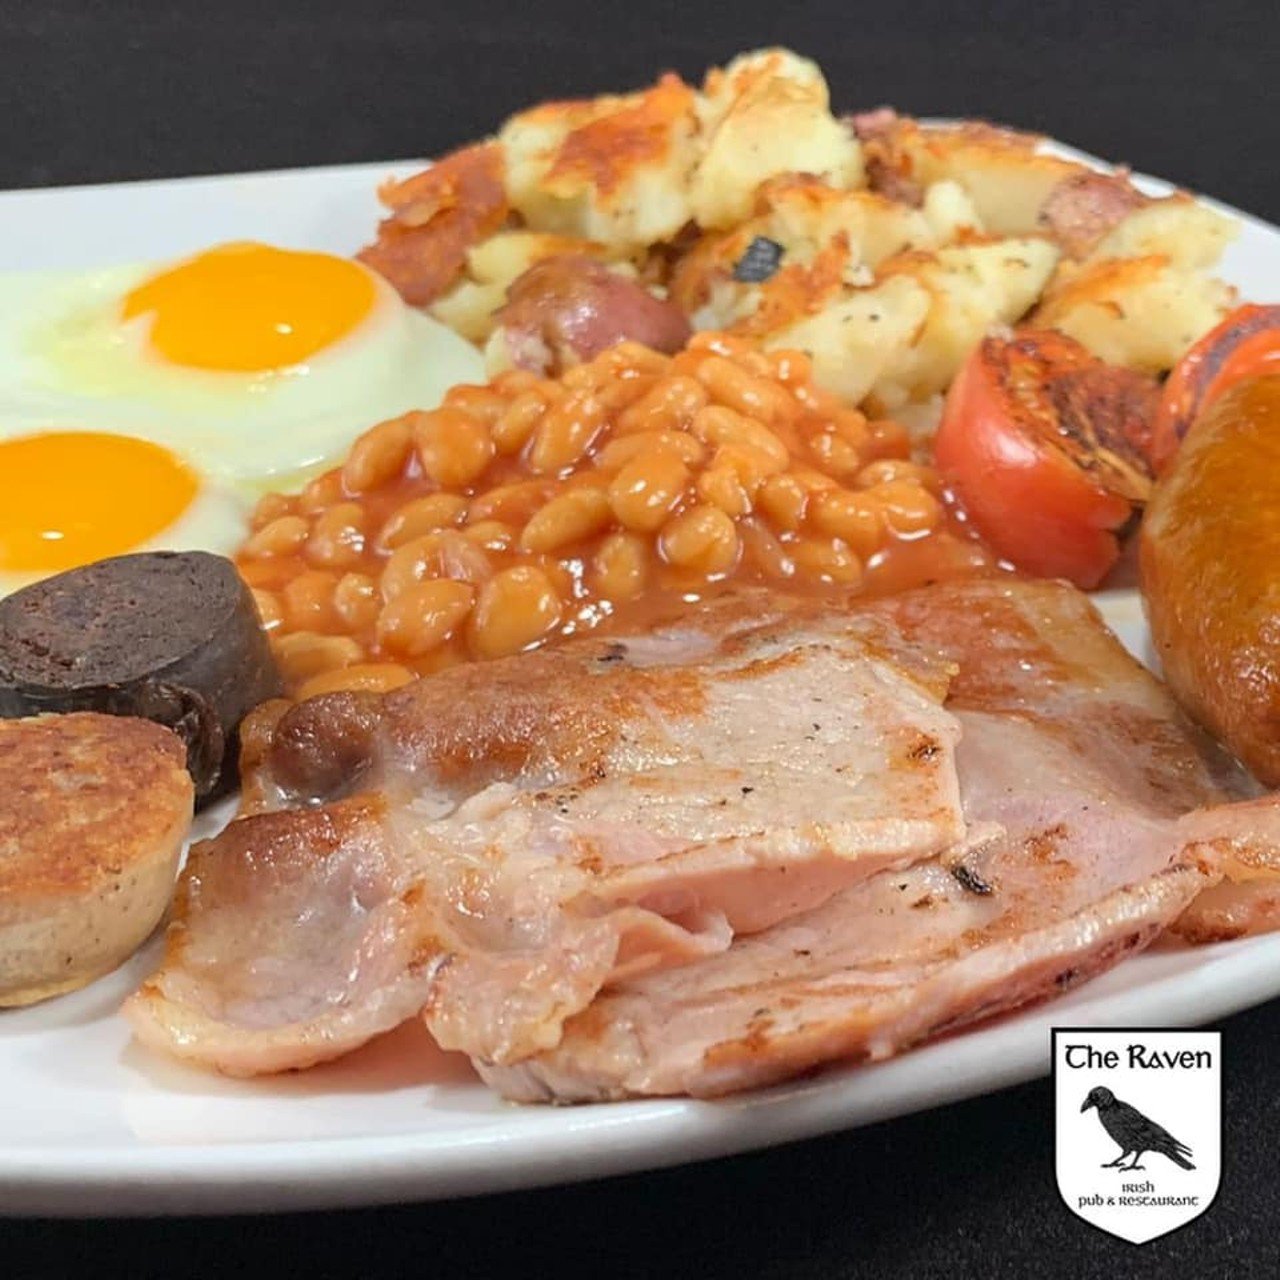 The Raven Irish Pub
3900 Shelbyville Road
The recently renovated Raven in St. Matthews offers a classic Irish breakfast.
Featured in the photo is The Full Irish &#150; Two eggs to order, with bangers, rashers, black and white pudding. Served with grilled tomato, baked beans, fried red potatoes and your choice of toast or muffin.
